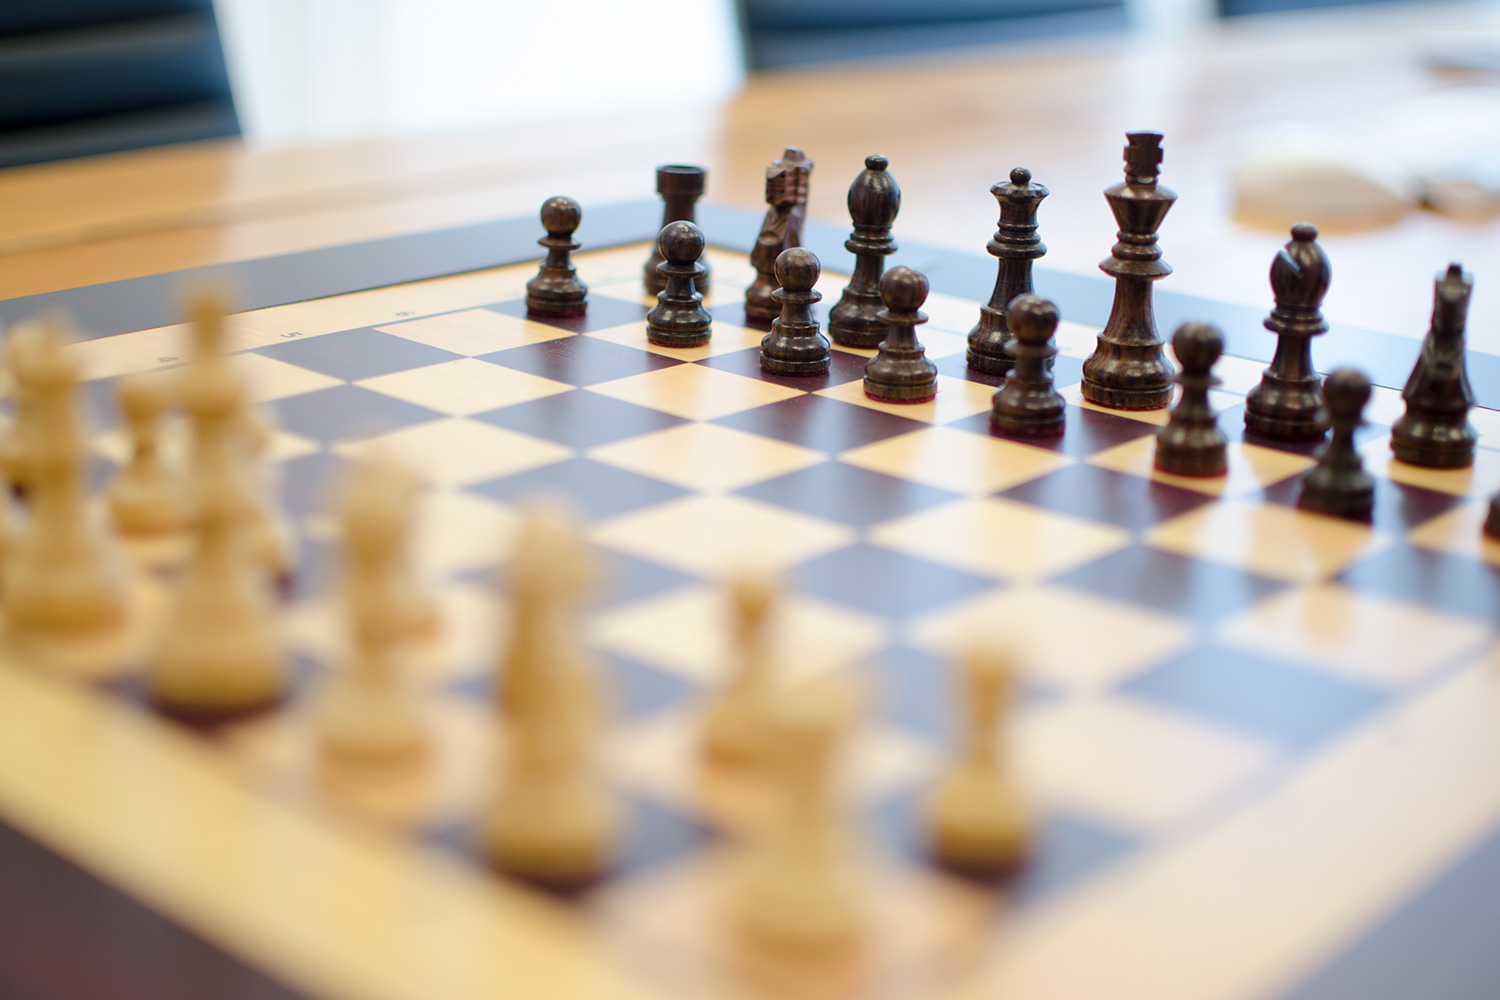 The Square Off Chessboard Moves Its Pieces Totally Hands-Free